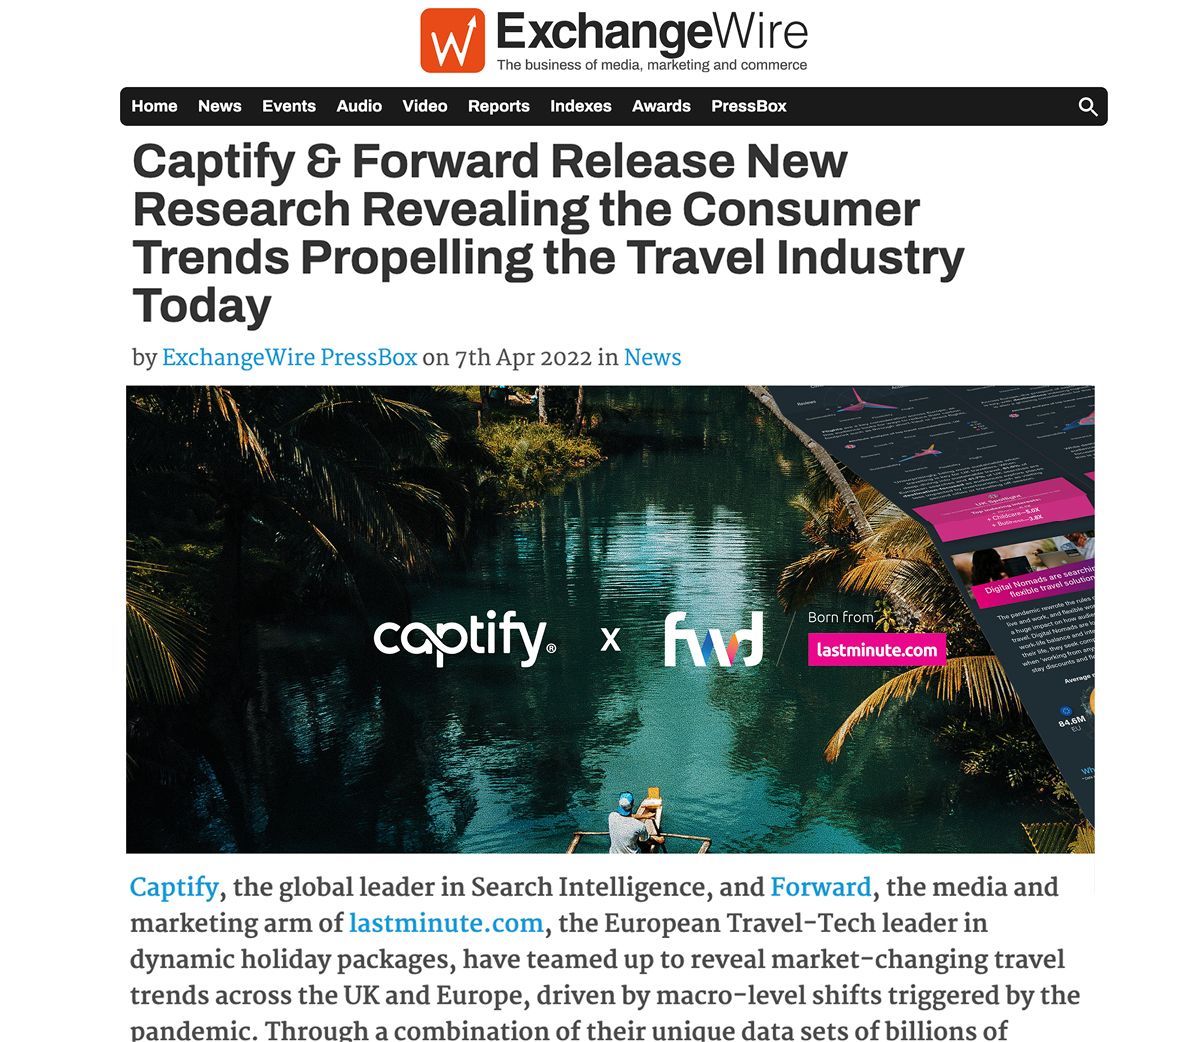 ExchangeWire: Captify & Forward Release New Research Revealing the Consumer Trends Propelling the Travel Industry Today